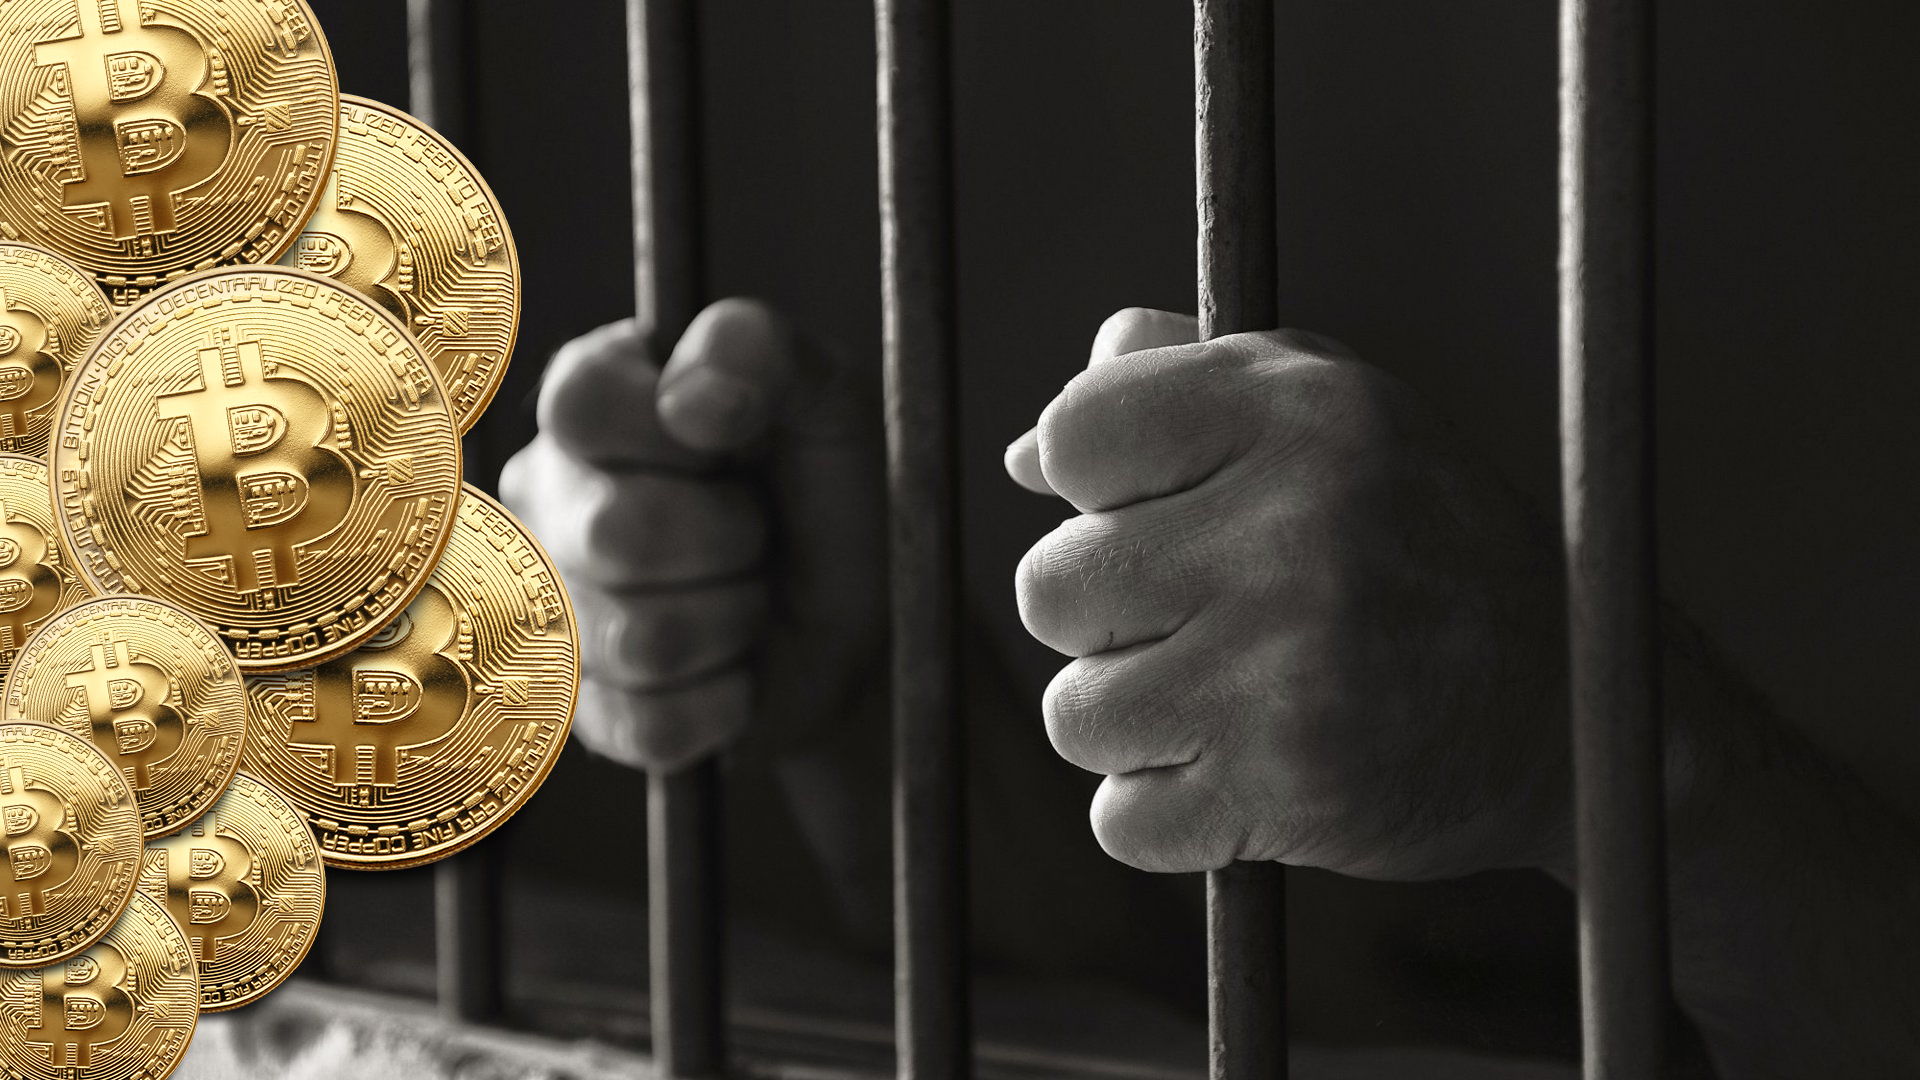 US Department of Justice seized 70,000 Bitcoins (About $1 Billion) from an illegal website.